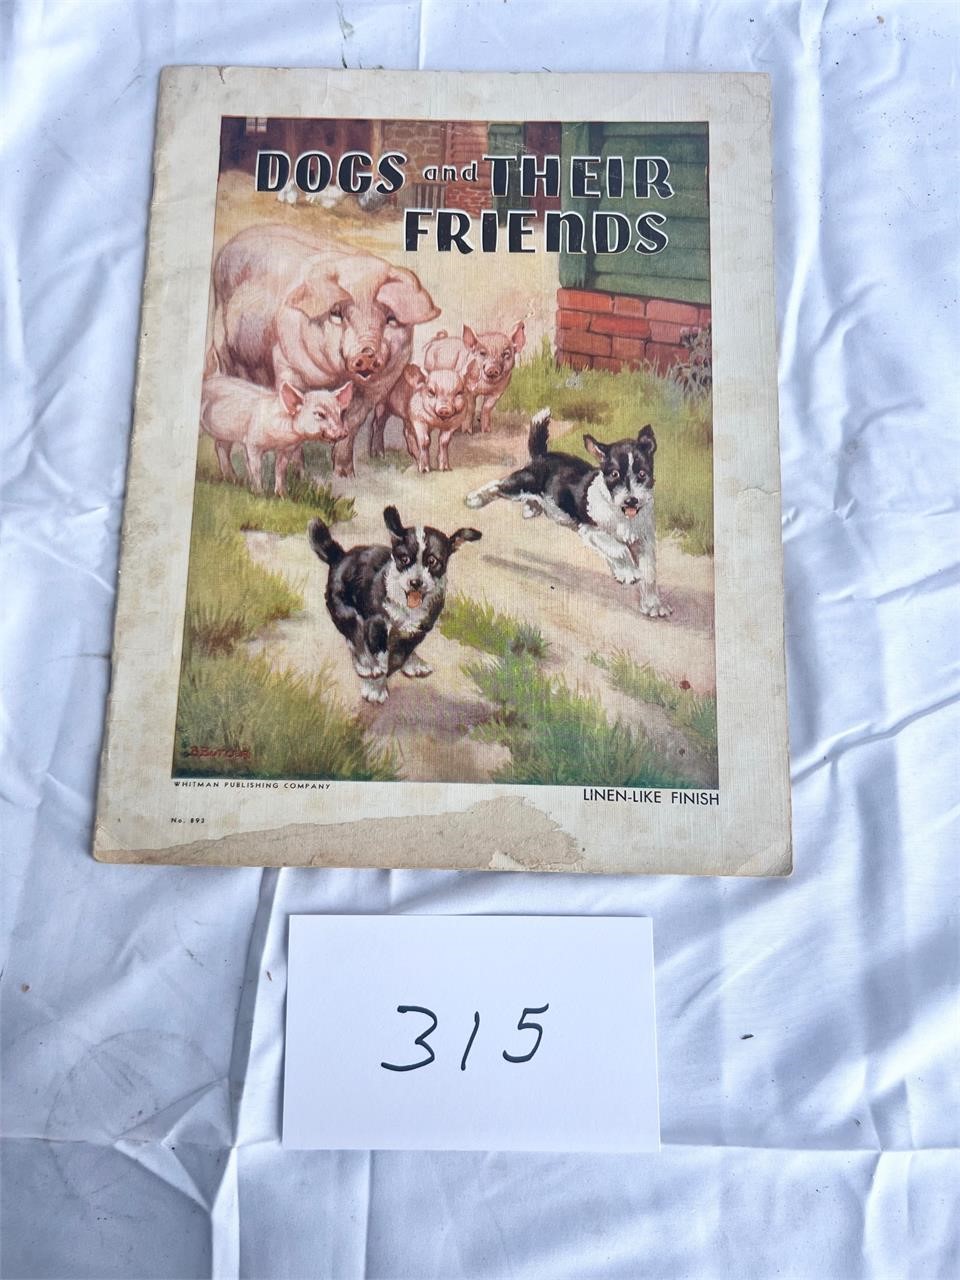 Findlay Antique and Collectable Sale #2